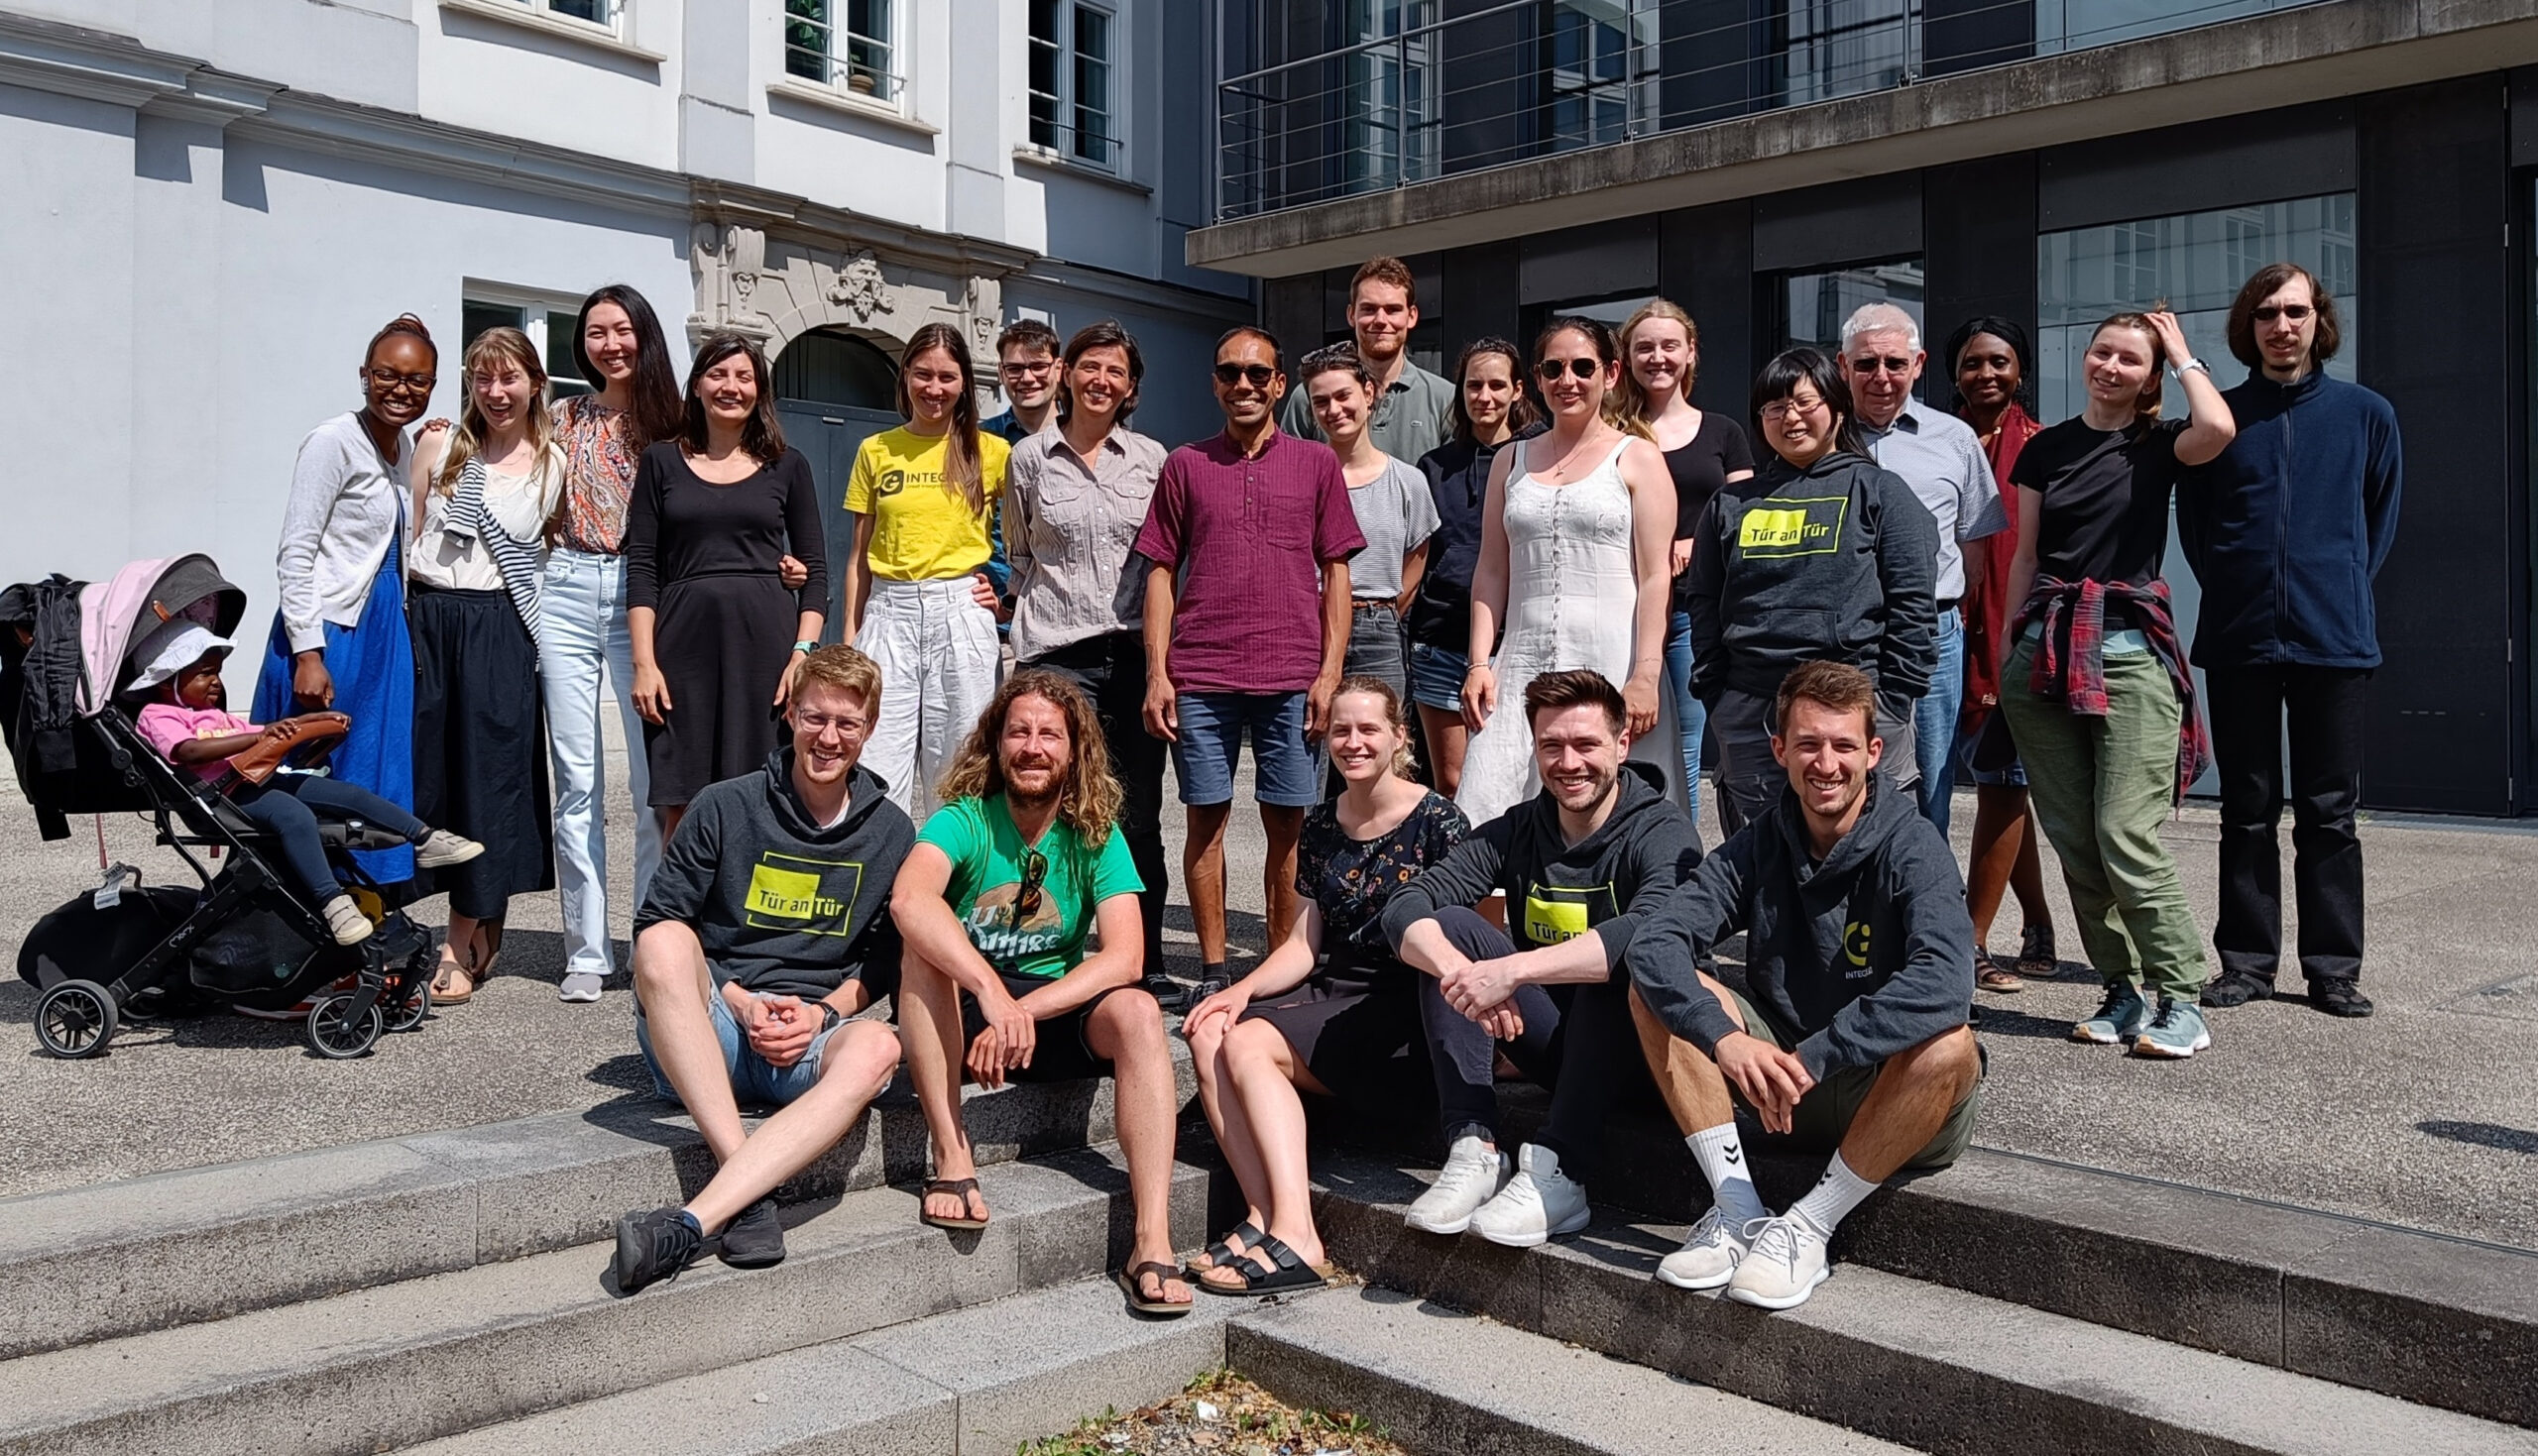 The picture shows the team members at the Integreat conference standing in the sun in front of Augsburg University of Applied Sciences.